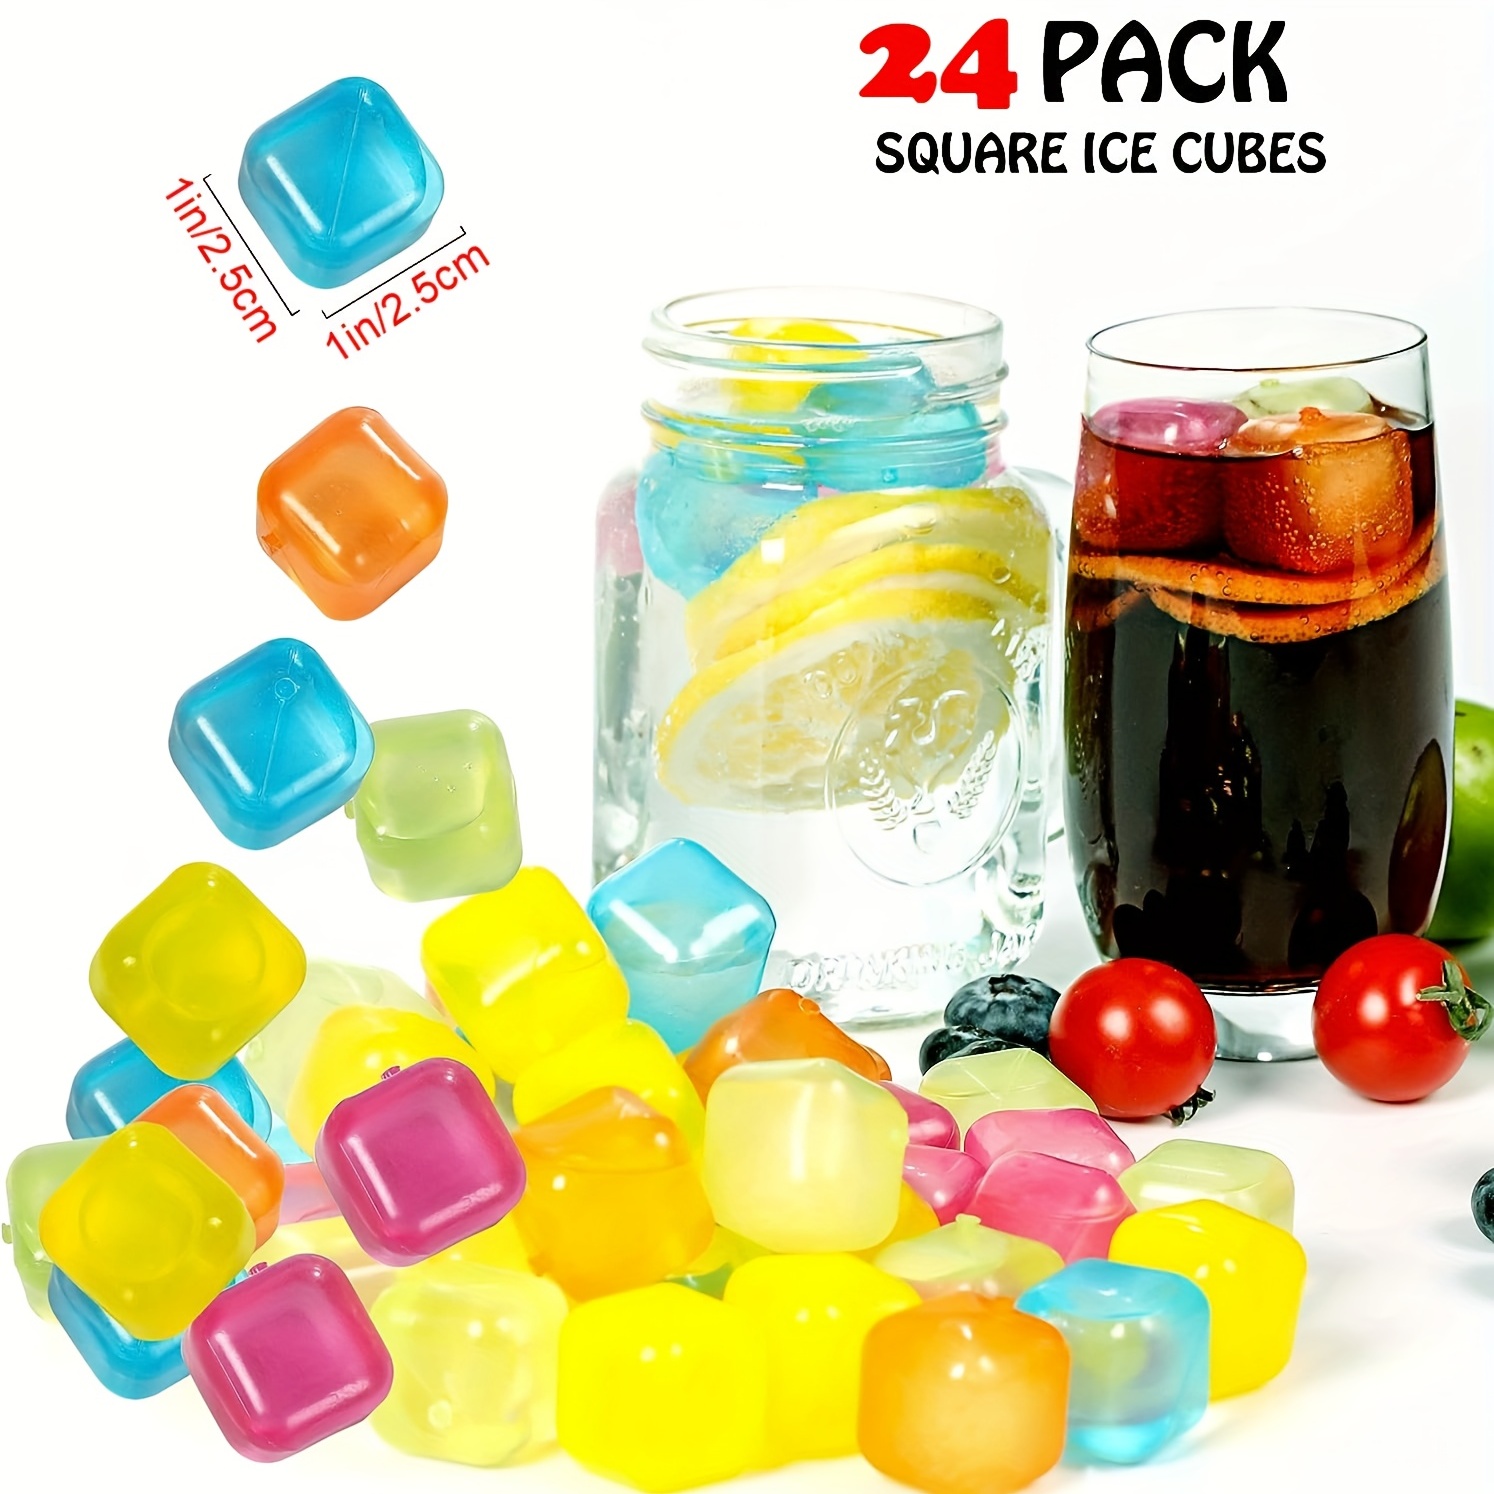 Reusable Ice Cubes, 24-Pack